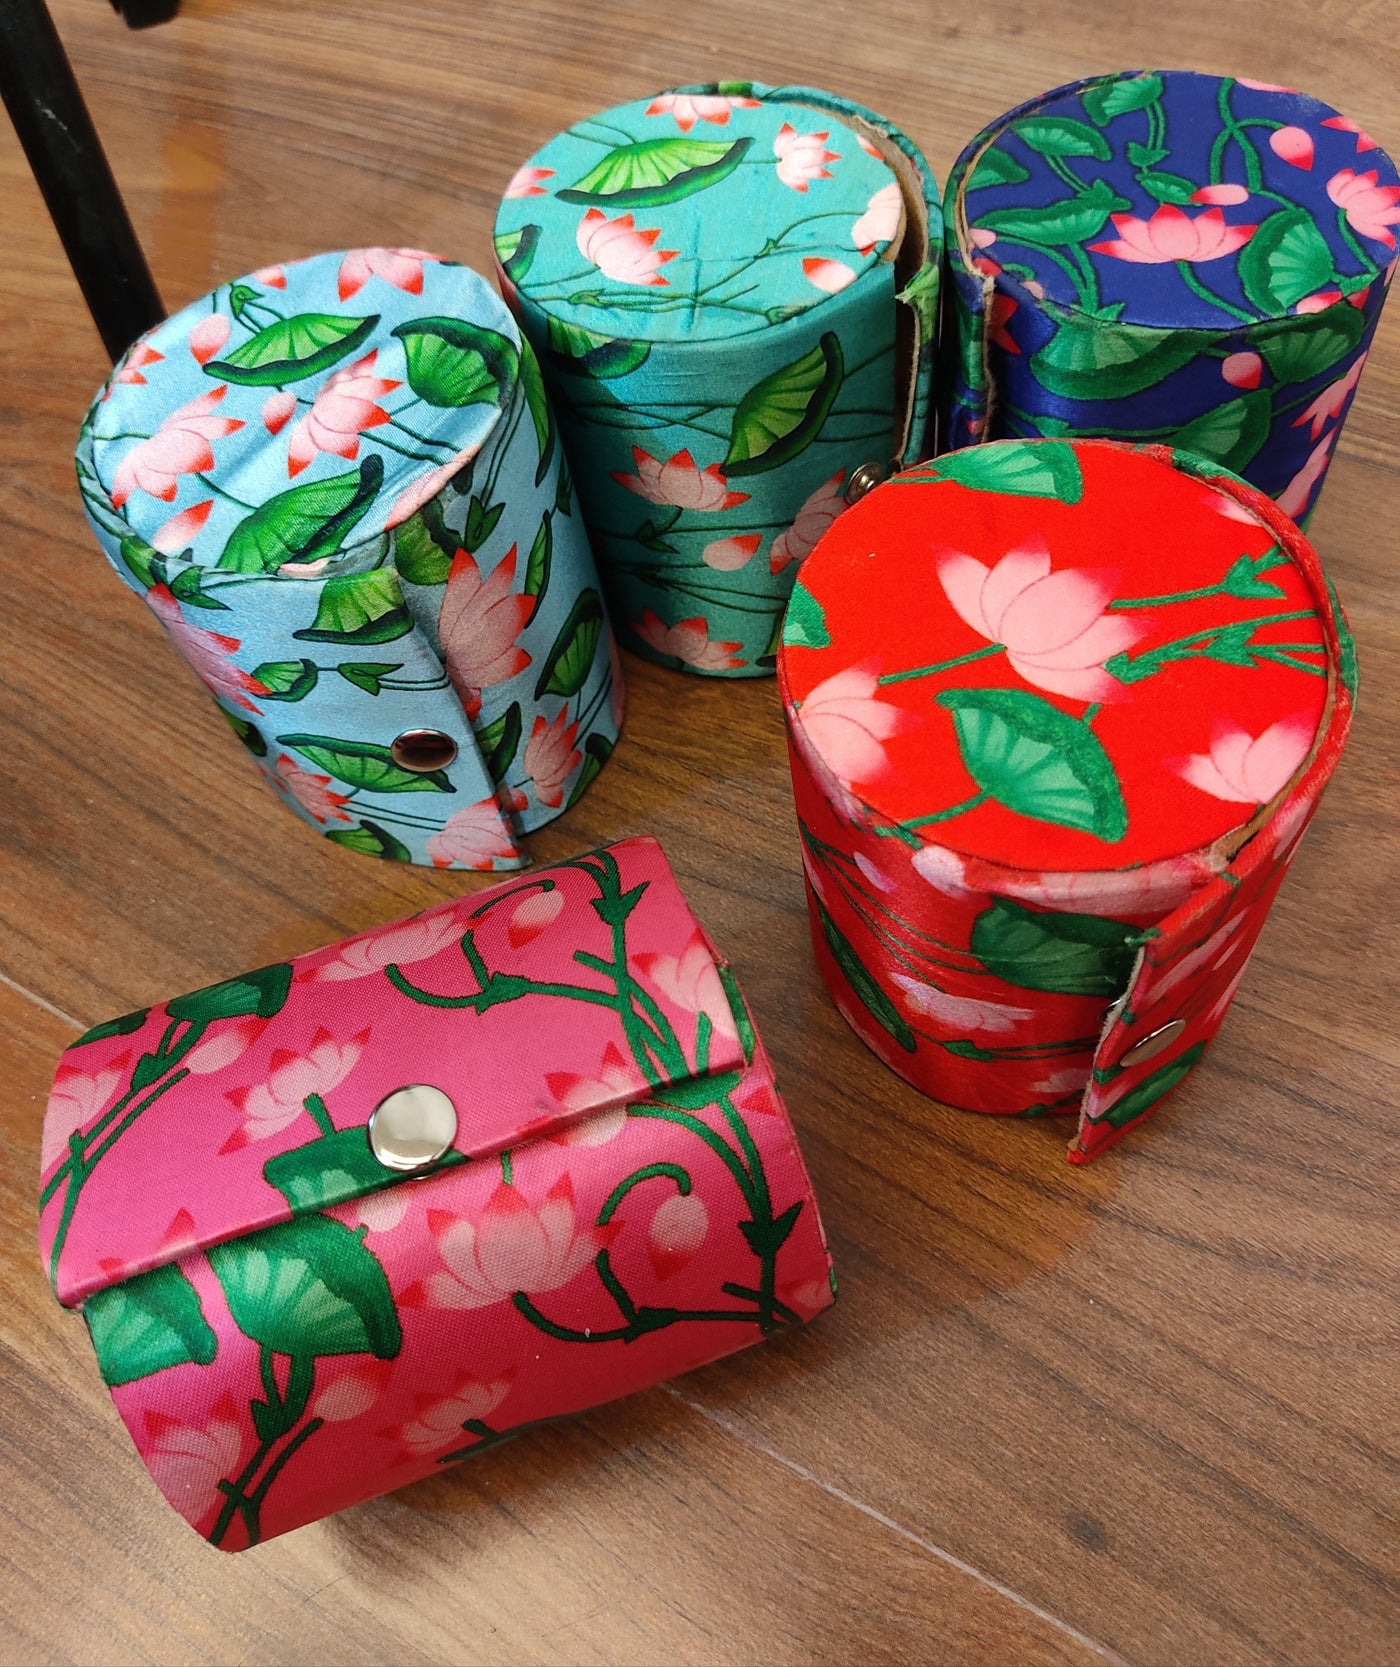 100 Rs each on buying 🏷in bulk | Call 📞 at 8619550223 Bangles Box LAMANSH® 4 inch Width Pichwai Print Bangle Boxes for Wedding Favors 🎁 | Gift Boxes for Bridesmaids